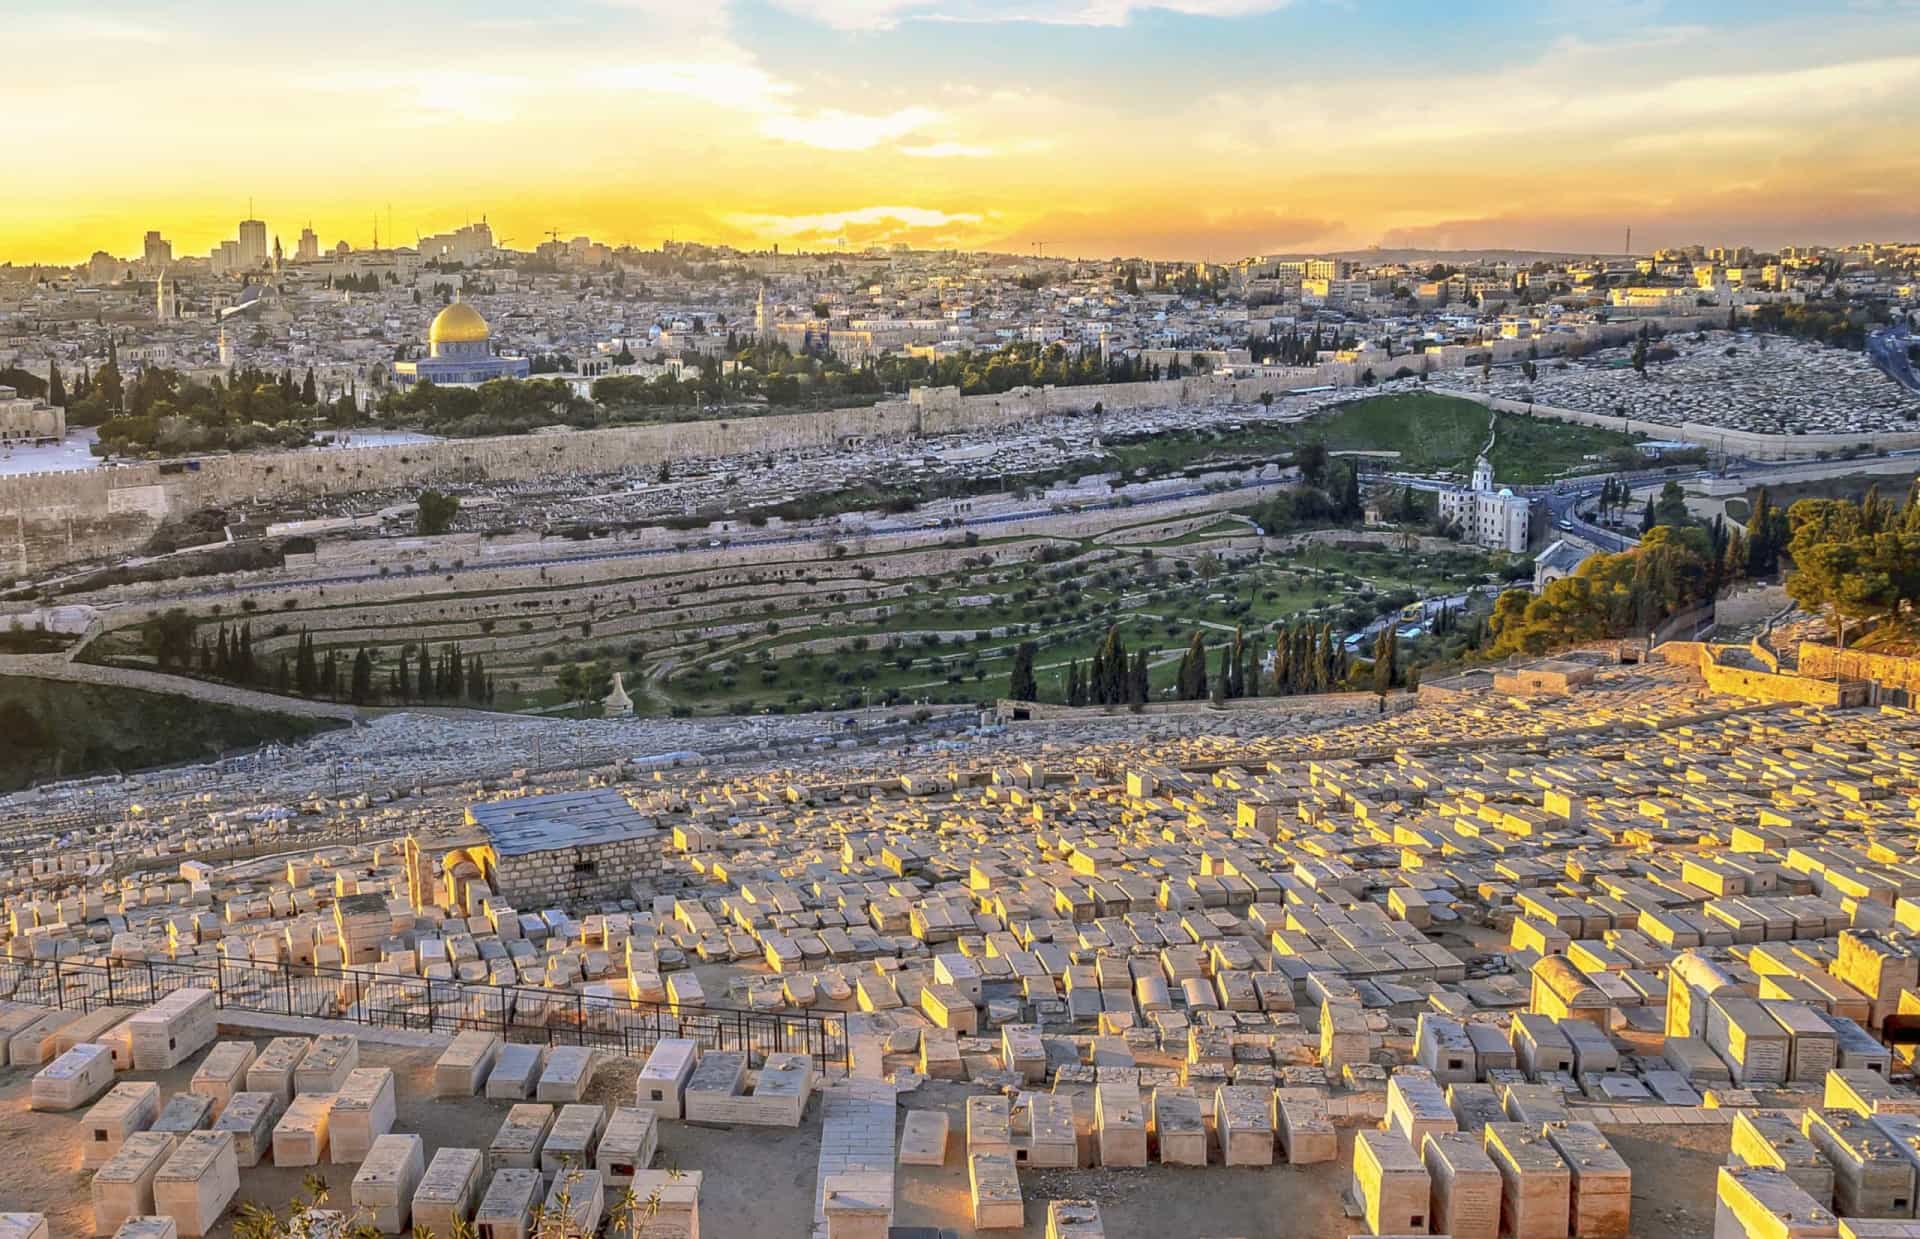 <p>The Mount of Olives east of Jerusalem's Old City is frequently mentioned in the New Testament as the place Jesus stood and wept over the city, an event known as <em>Flevit super illam</em> in Latin. The mount has been used as a Jewish cemetery for over 3,000 years.</p>